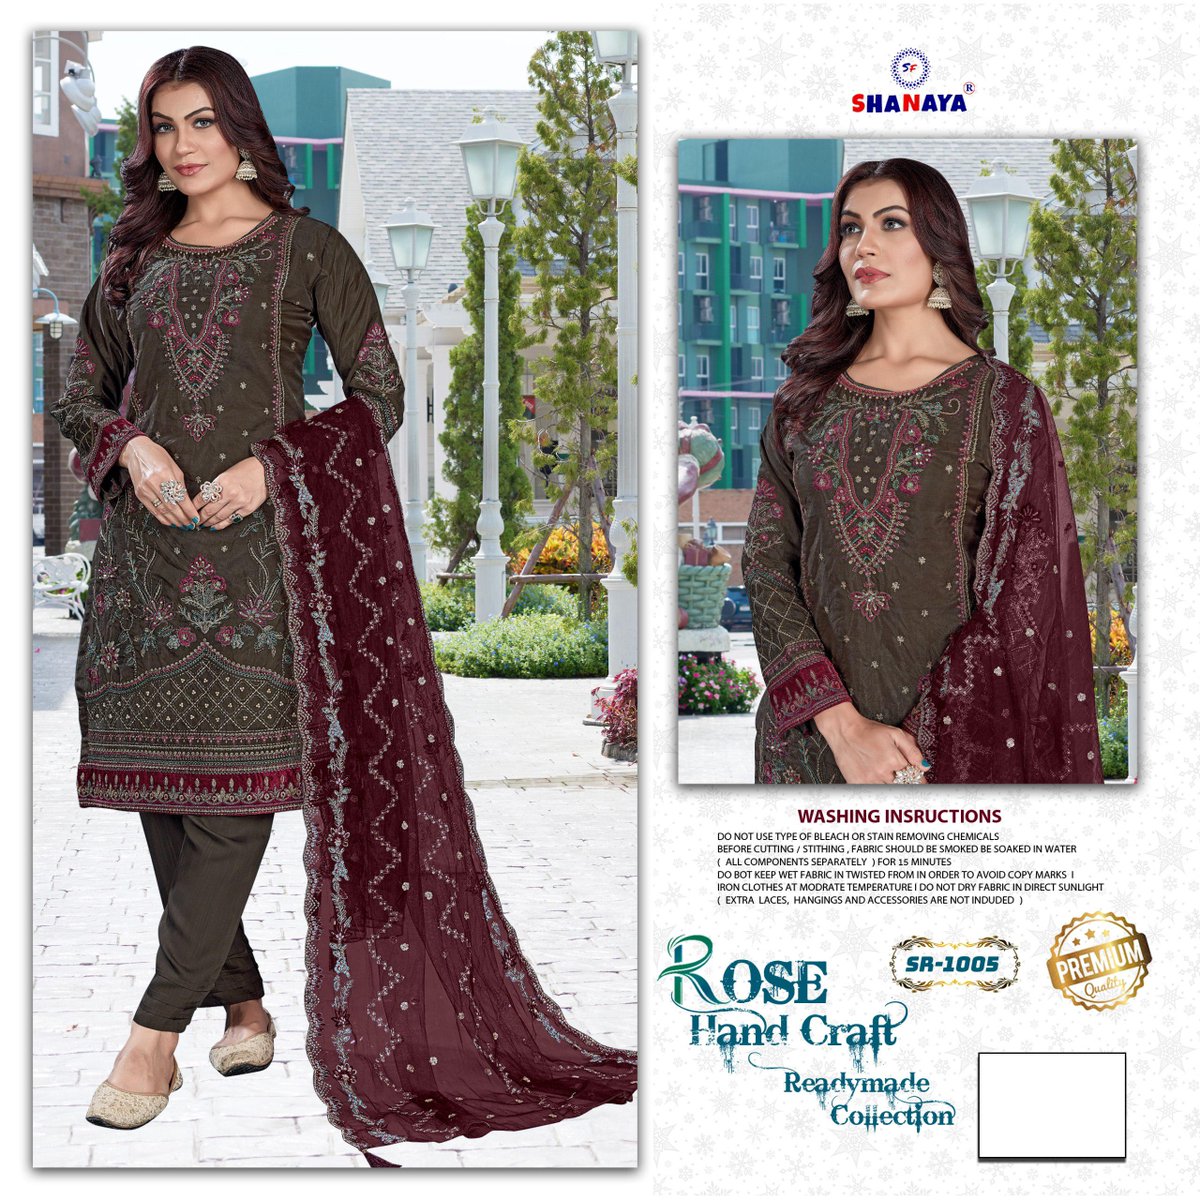 ROSE HAND CRAFT READY COLLECTION :- SR -1005
SHANAYA®️ BY PRESENTS

'Fashion Forward, Culture Rich: Step into Our World of Pakistani Dresses!'
.
.
#ShanayaFashion #RoseHandCraft #rosepremiumedition #pakistanidressesinindia
#pakistanidress #nyfashionblogger #liverpoolboutique